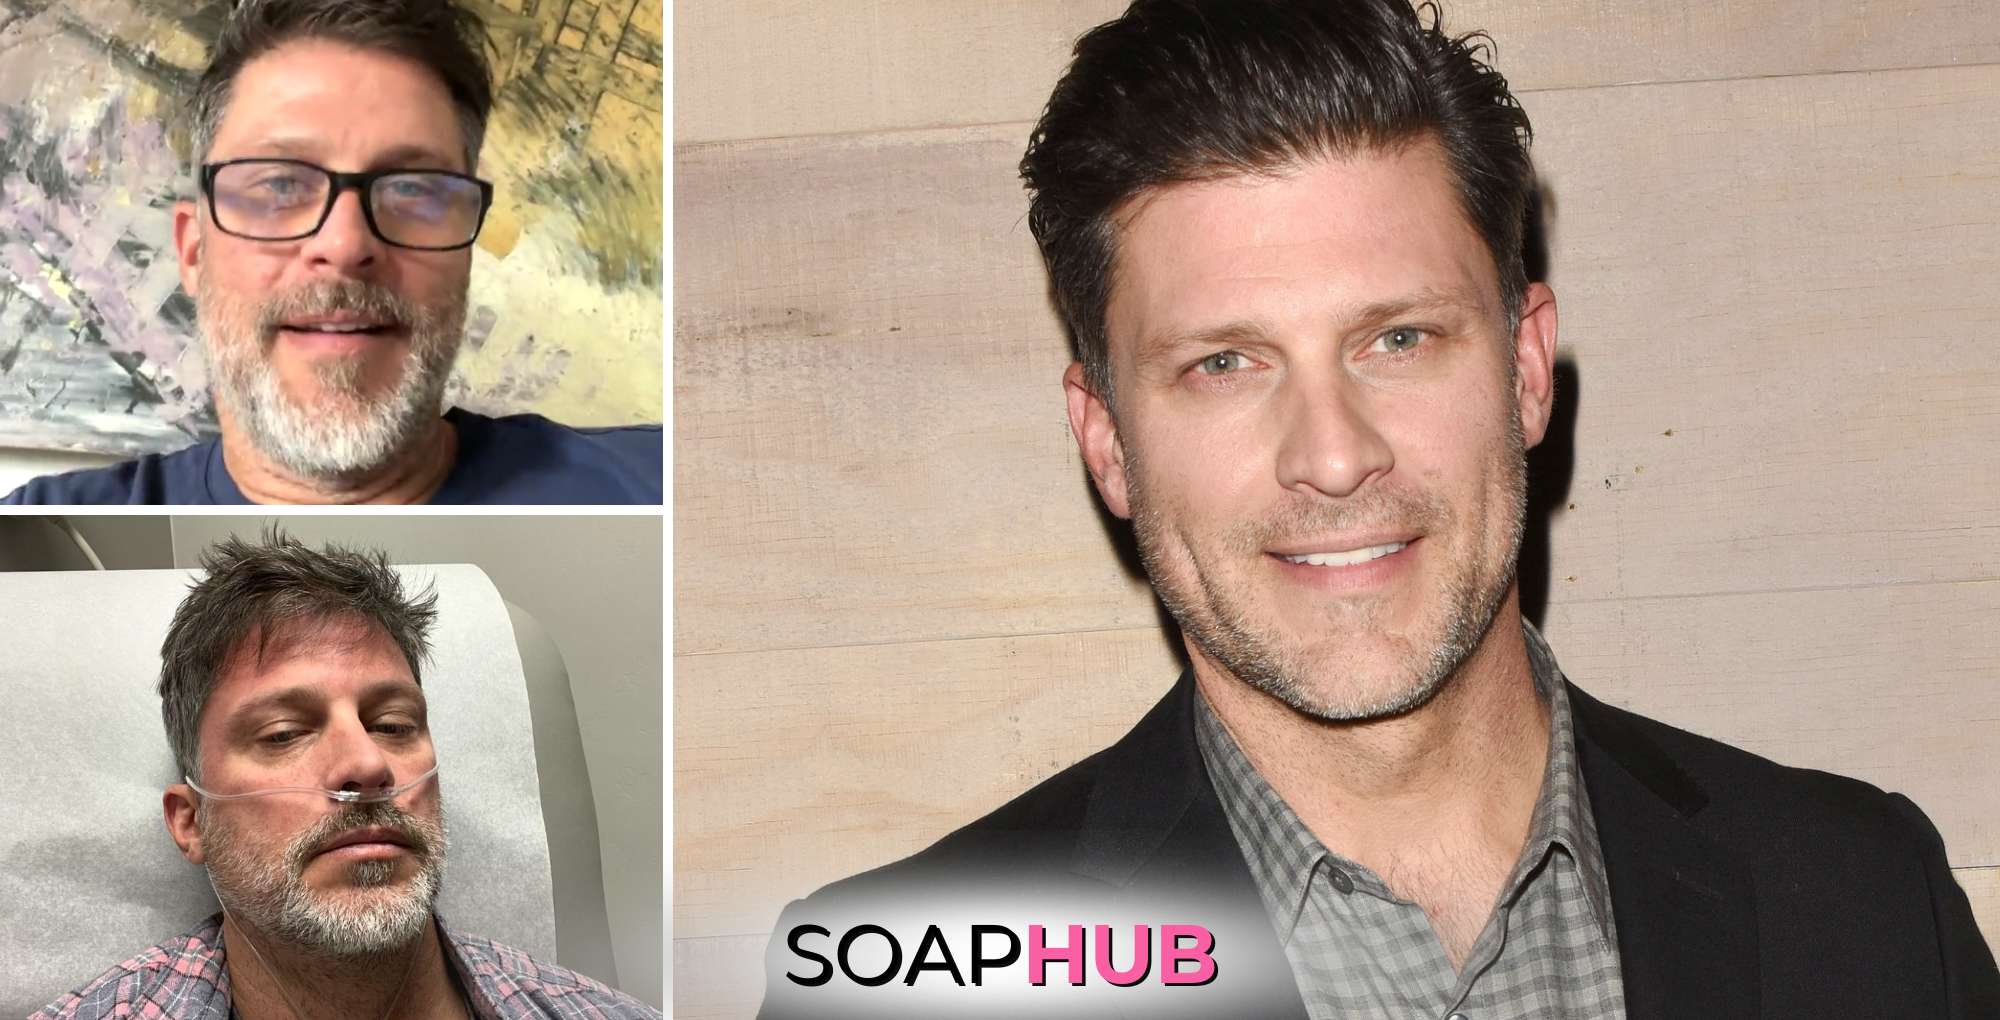 Days of our Lives star Greg Vaughan with the Soap Hub logo across the bottom.